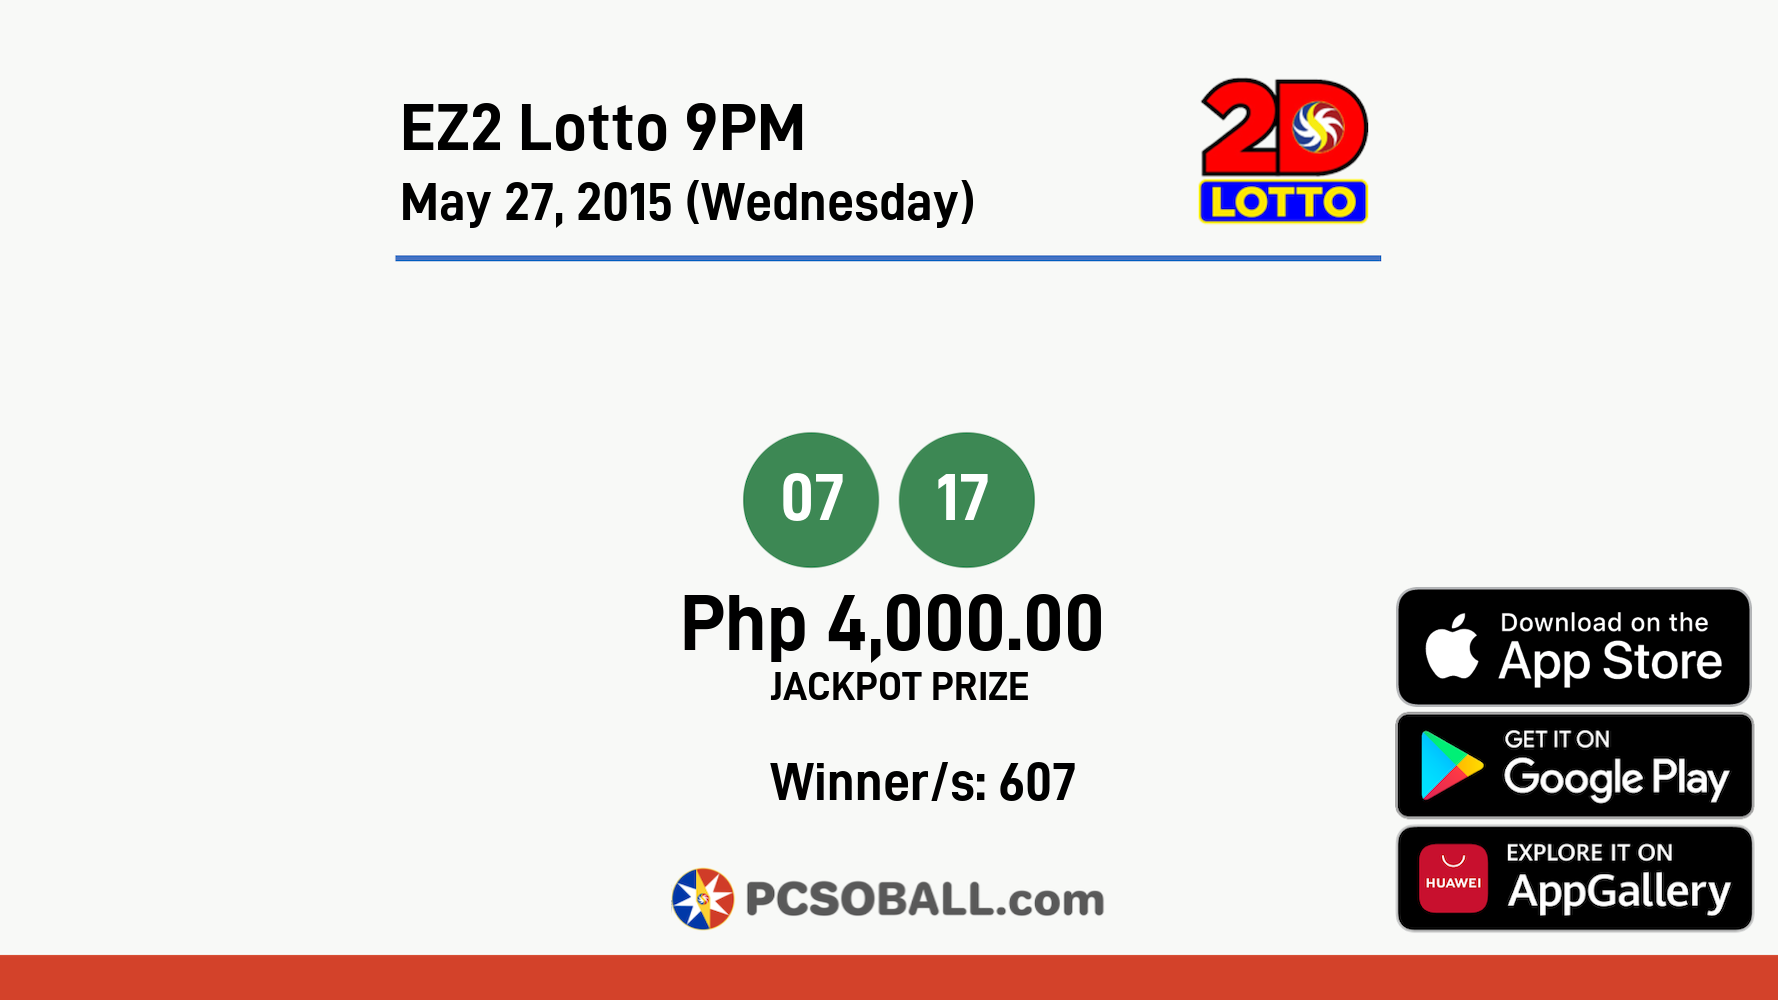 EZ2 Lotto 9PM May 27, 2015 (Wednesday) Result